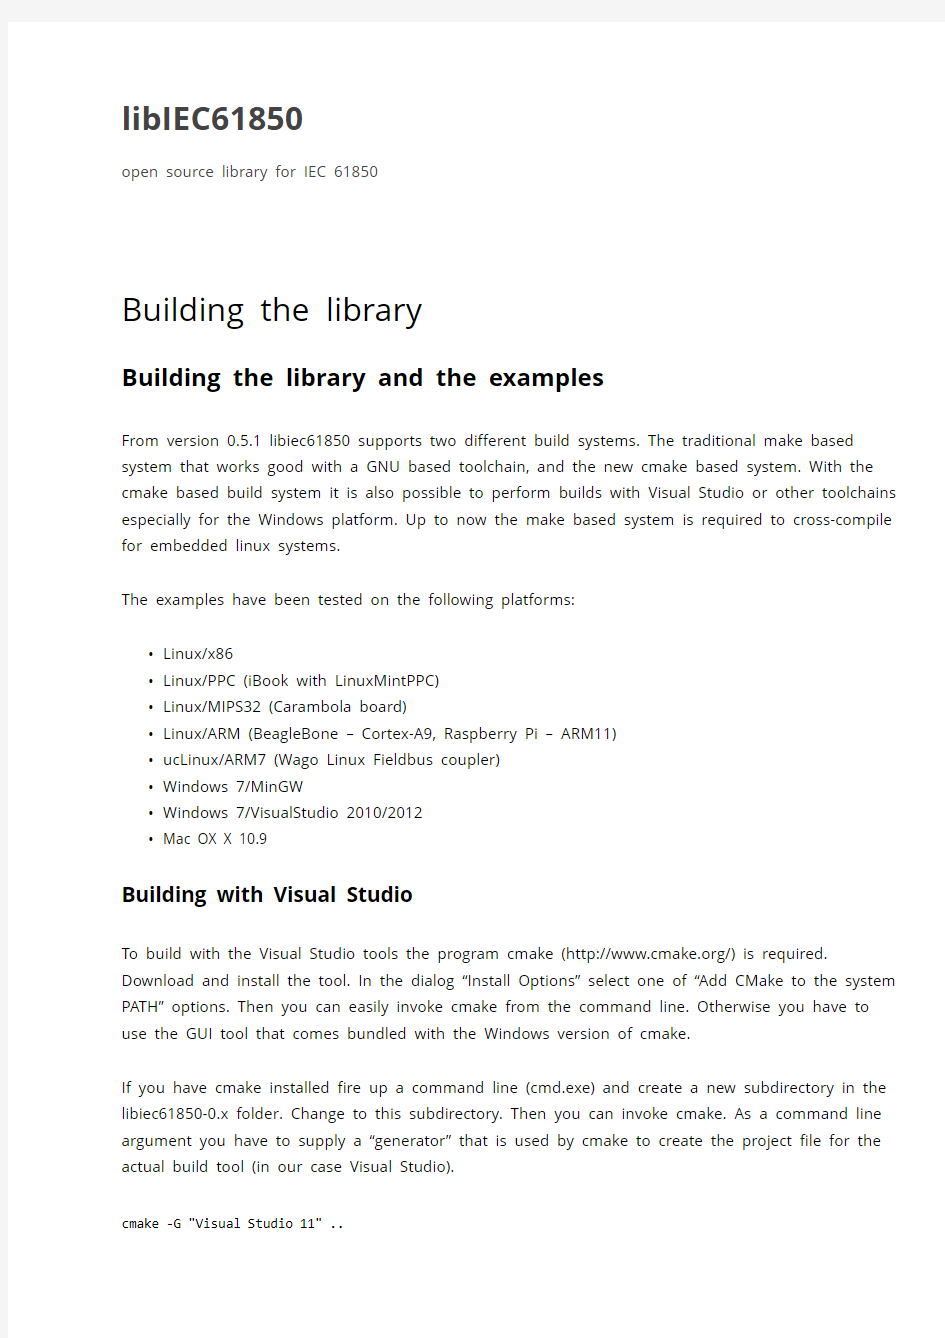 libIEC61850 doc 3 Building the library